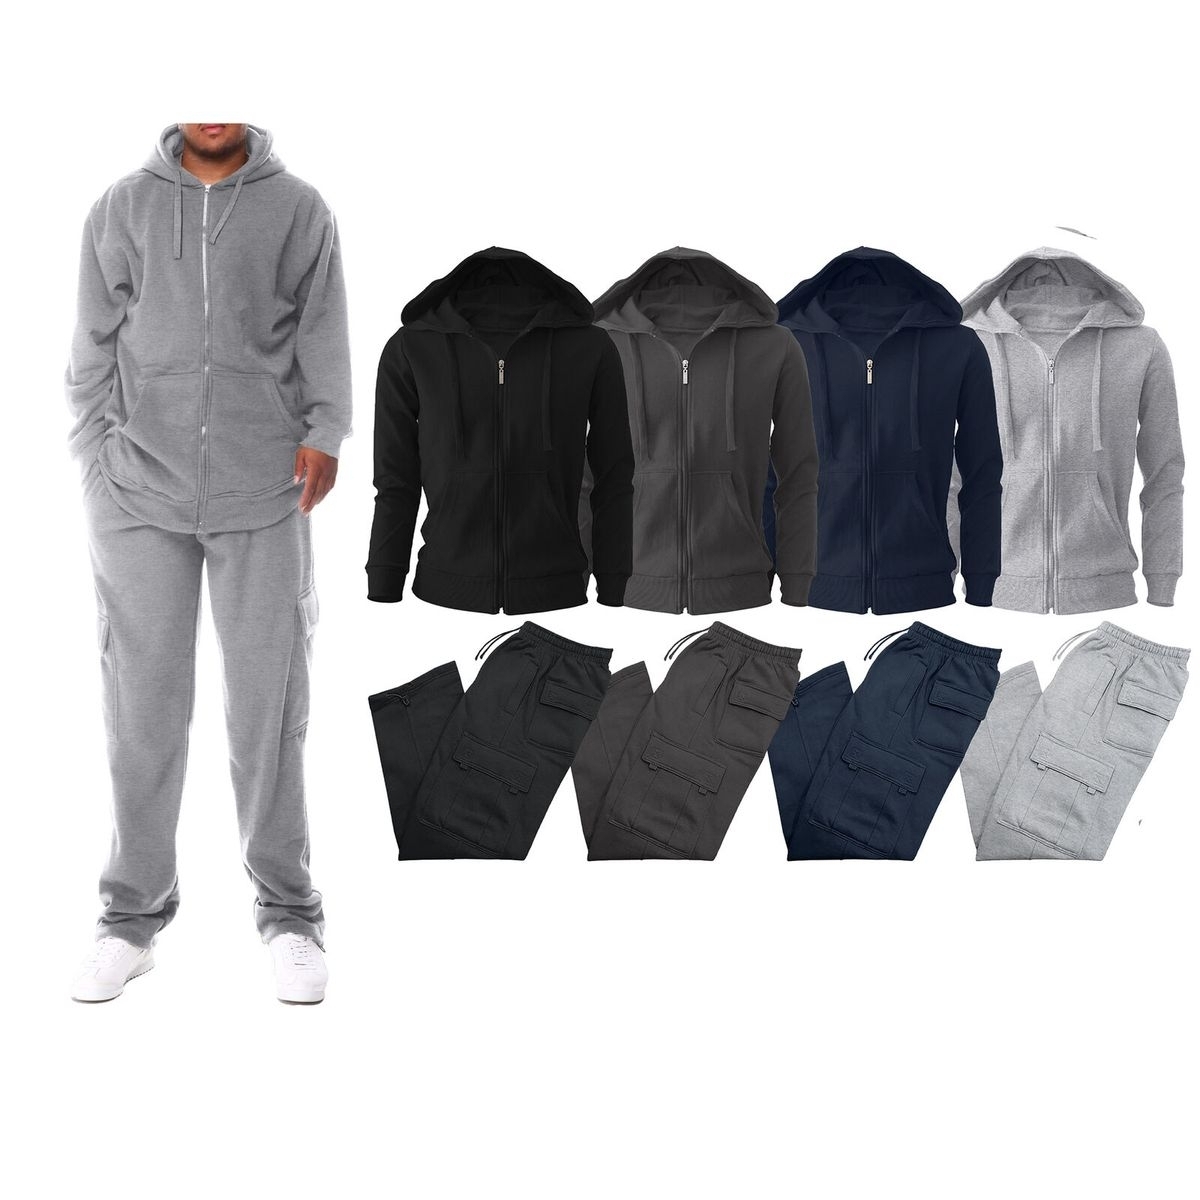 2-Pack: Men's Big & Tall Winter Warm Athletic Active Cozy Fleece Lined Multi-Pocket Full Zip Up Cargo Tracksuit - Grey, Xx-large